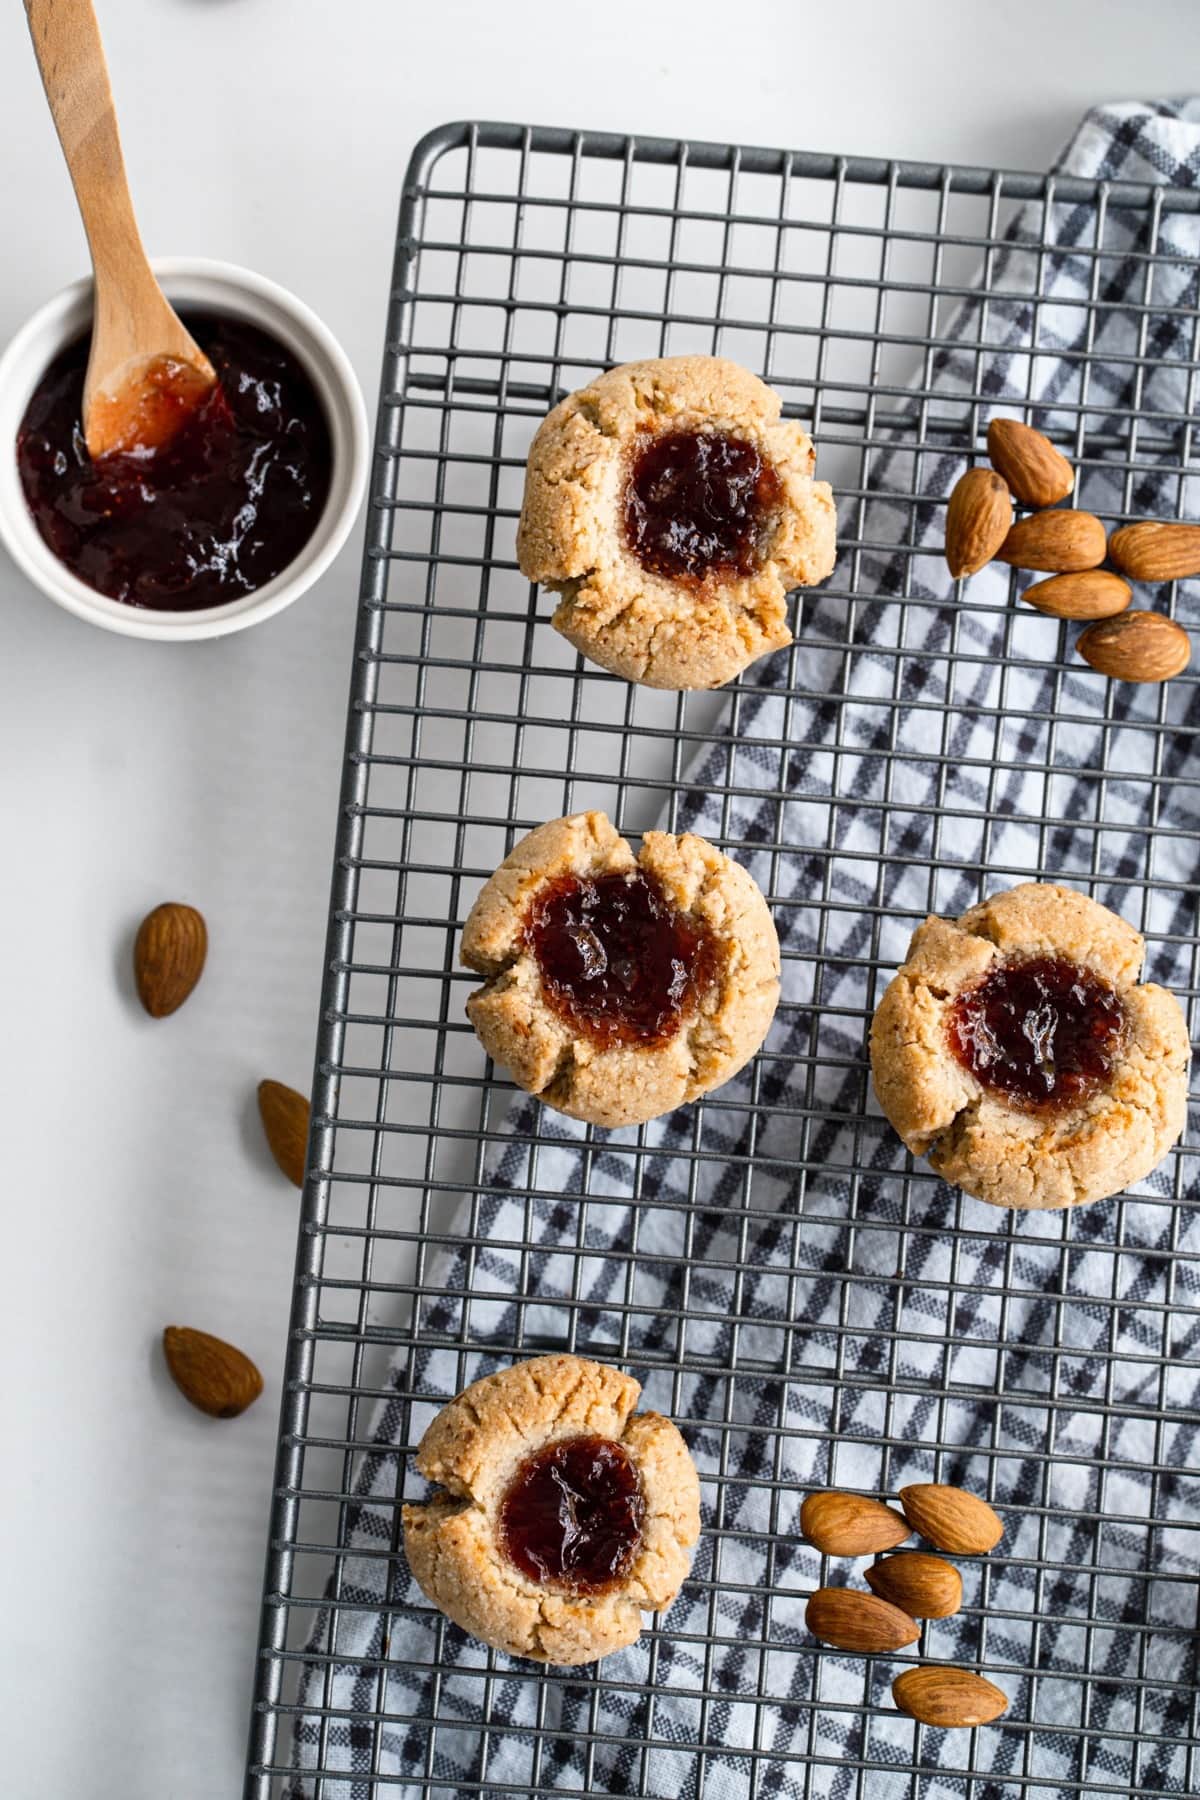 Thumbprint cookies with jam filling and pieces of almonds on a cooling rack.